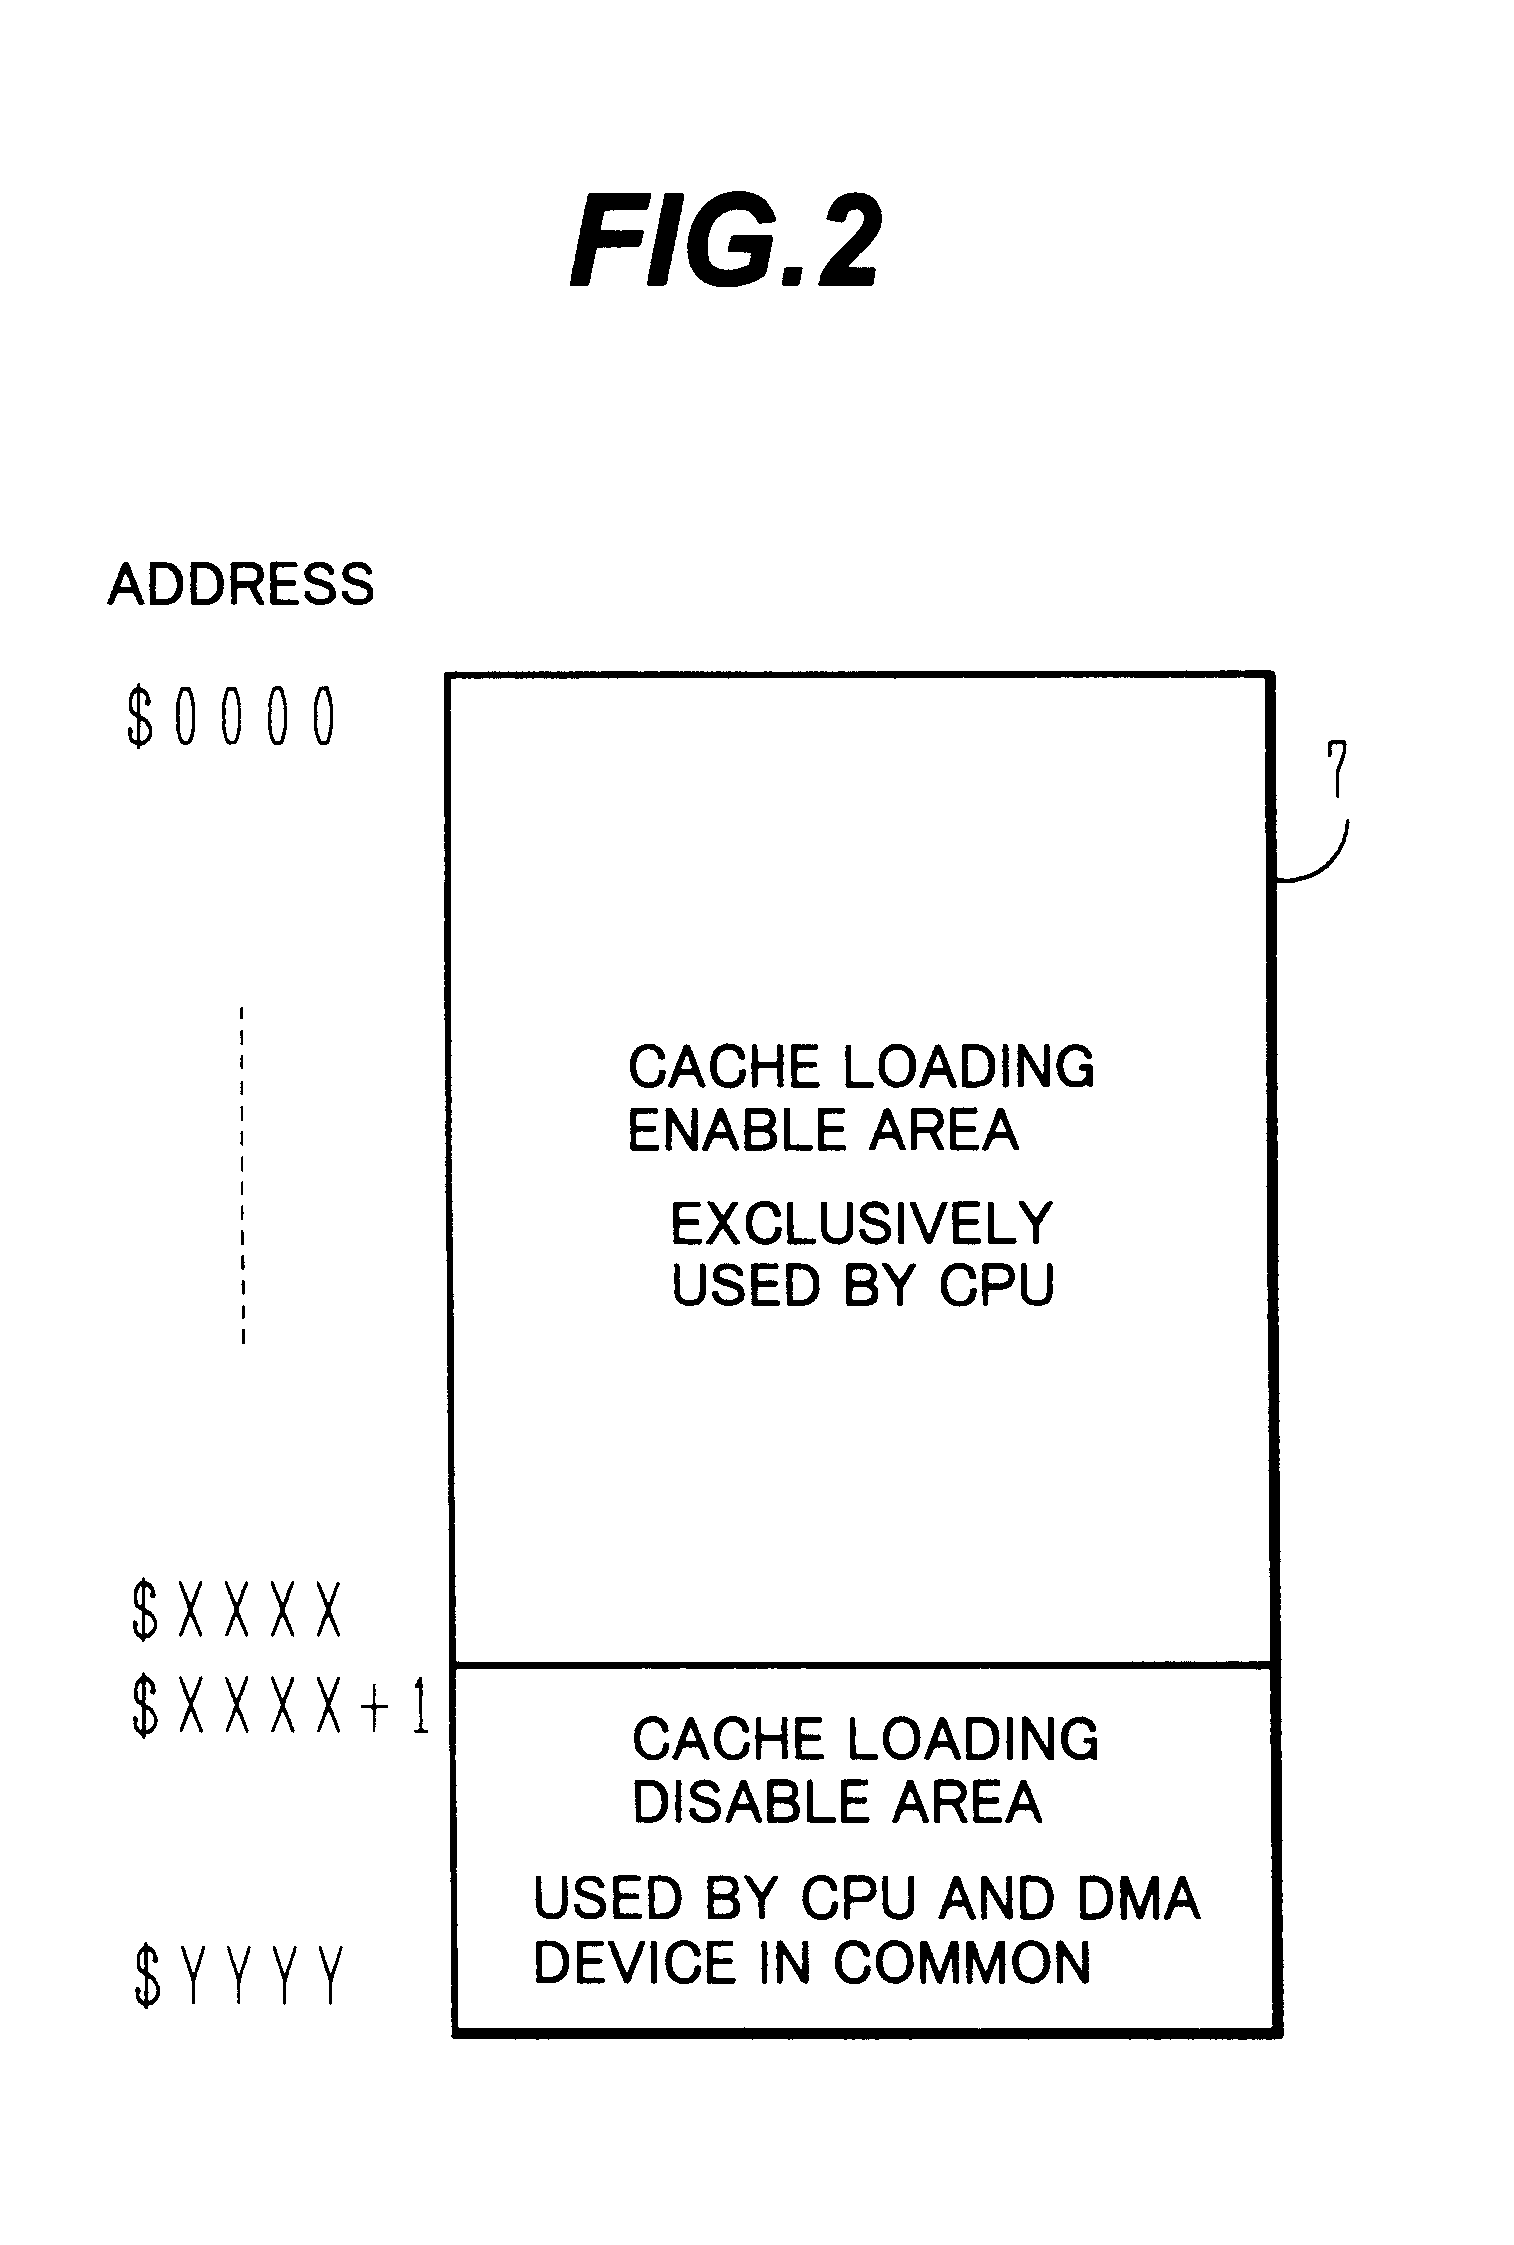 Main memory control apparatus for use in a memory having non-cacheable address space allocated to DMA accesses